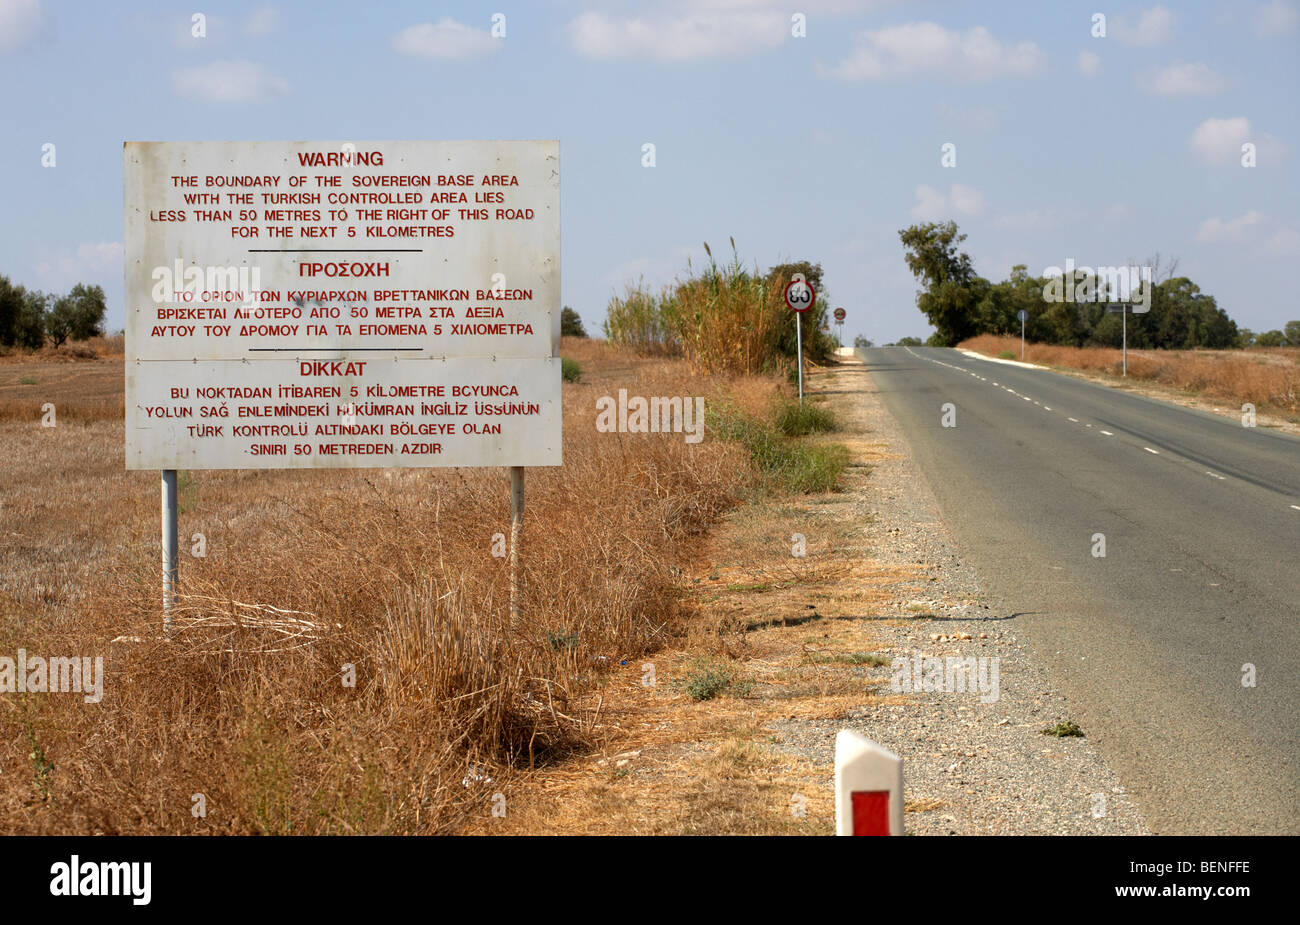 warning road sign warning of the border of the turkish military controlled area of the SBA Sovereign Base area of Dhekelia in cyprus Stock Photo